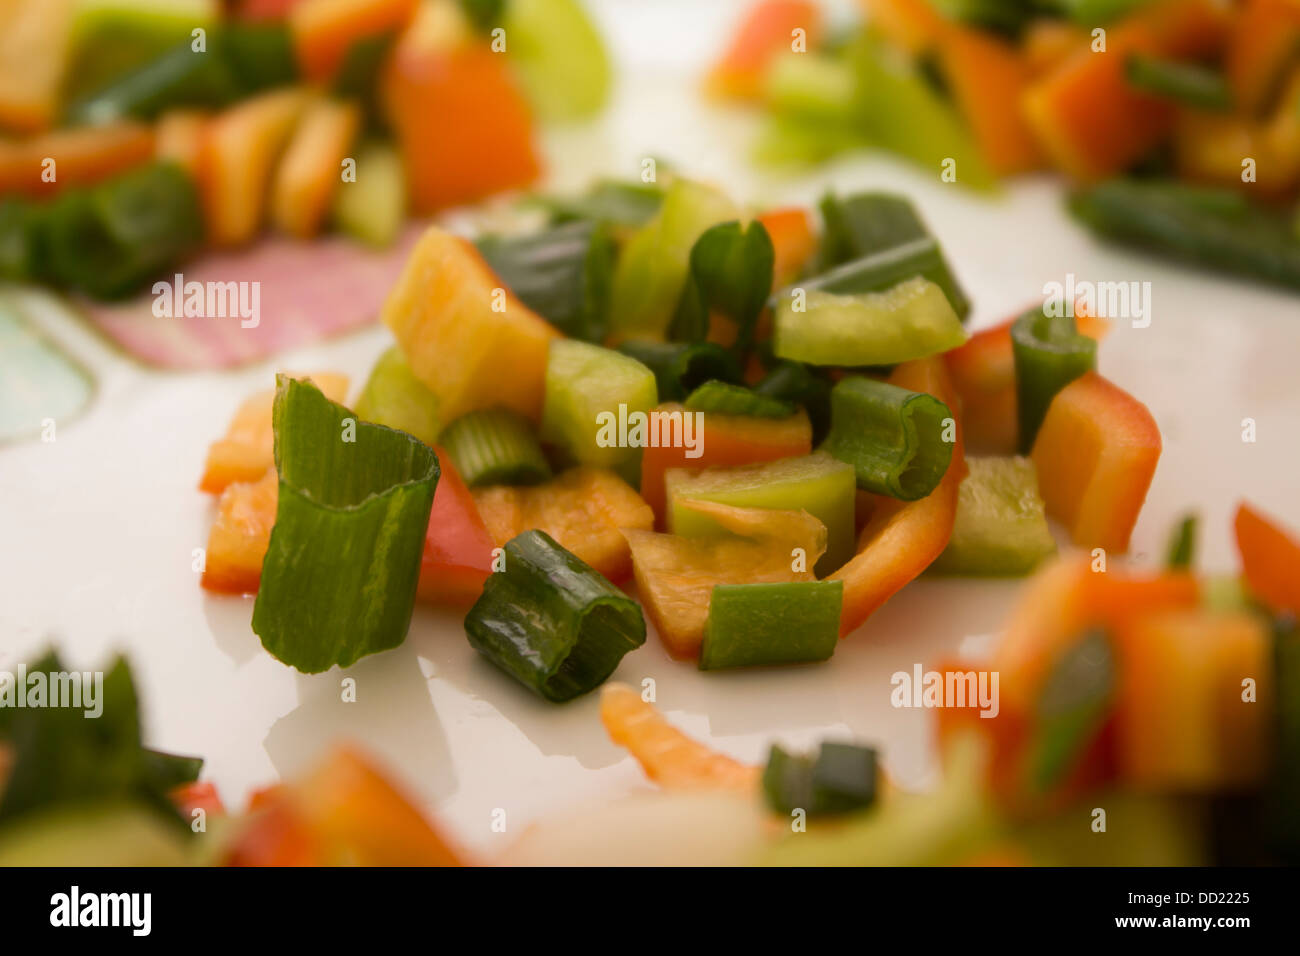 Chopped vegetables in a plate close-up Stock Photo